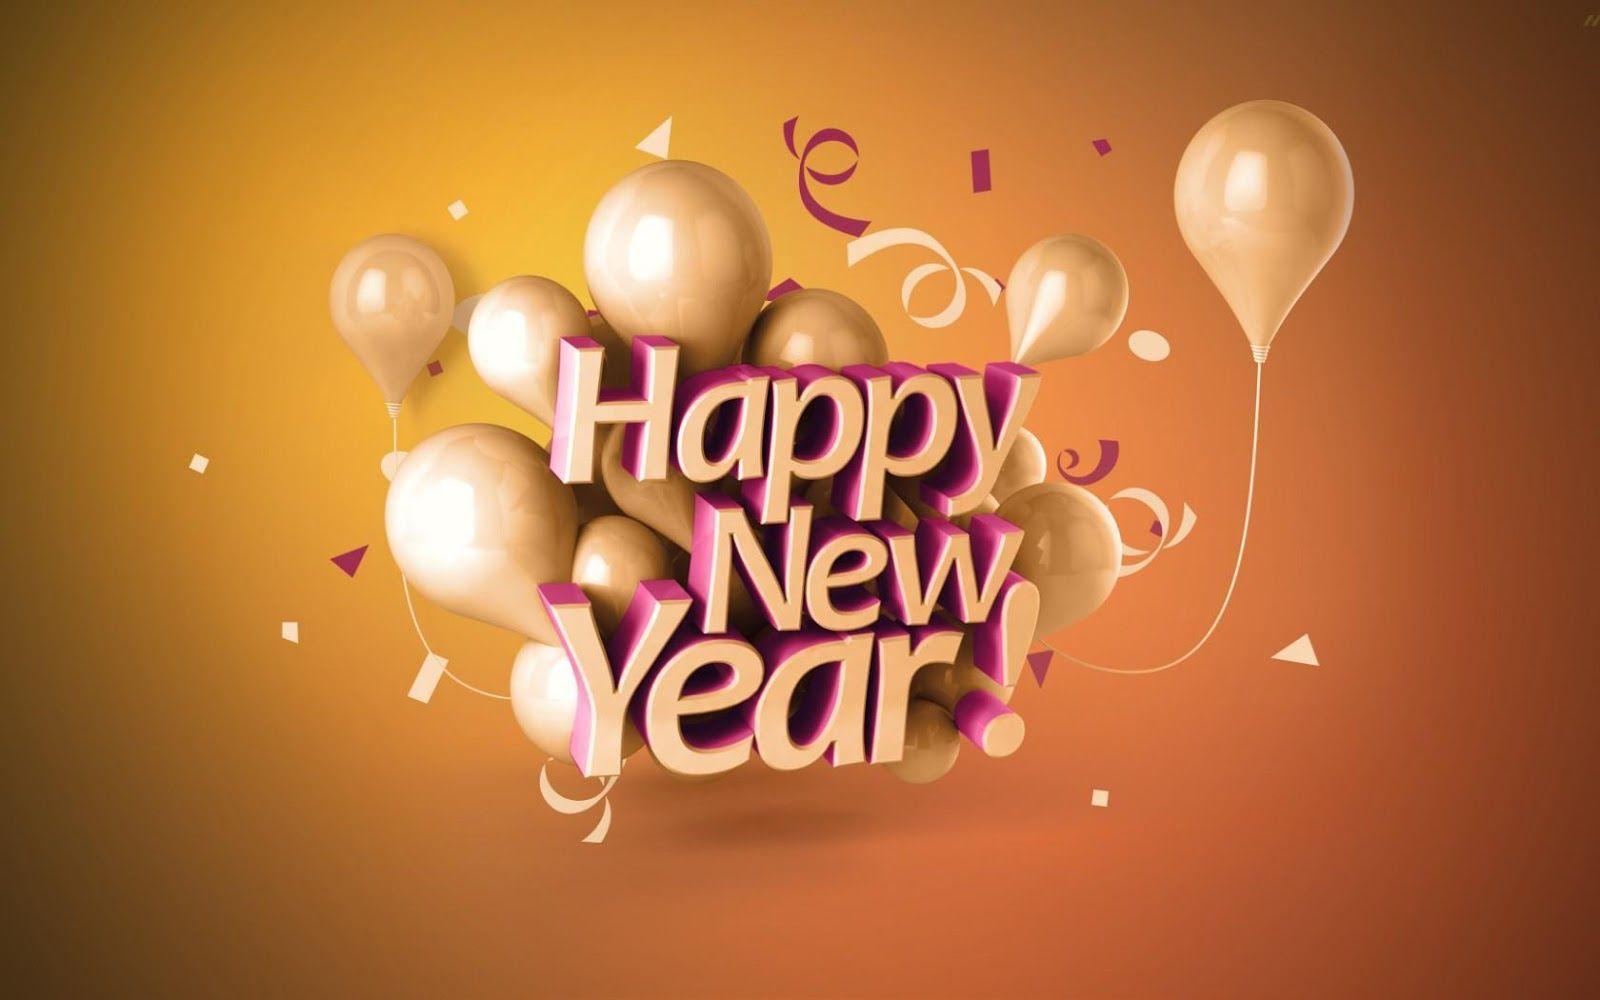 Happy New Year Wallpaper, Themes, Image For Desktop, Laptops